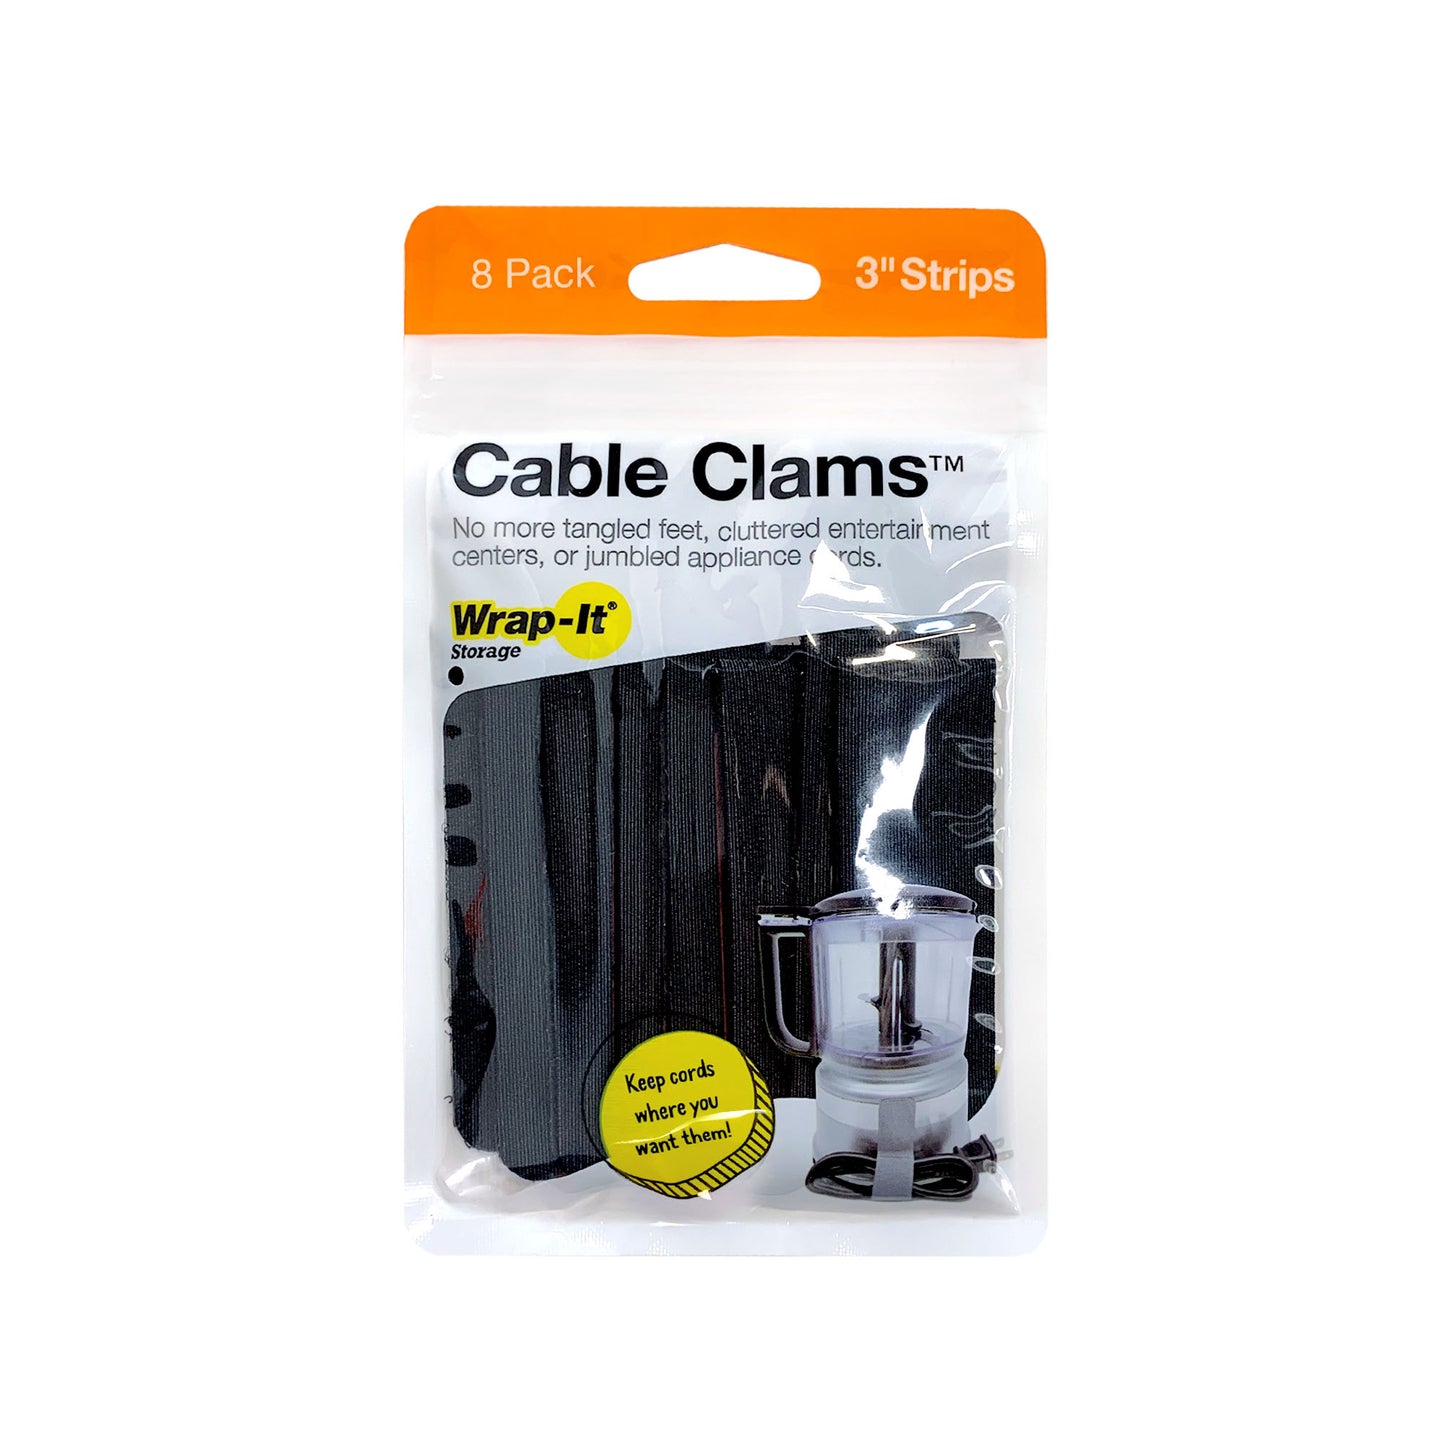 Cable Clams - 3-in. Strip (8-Pack) - Wrap-It Storage